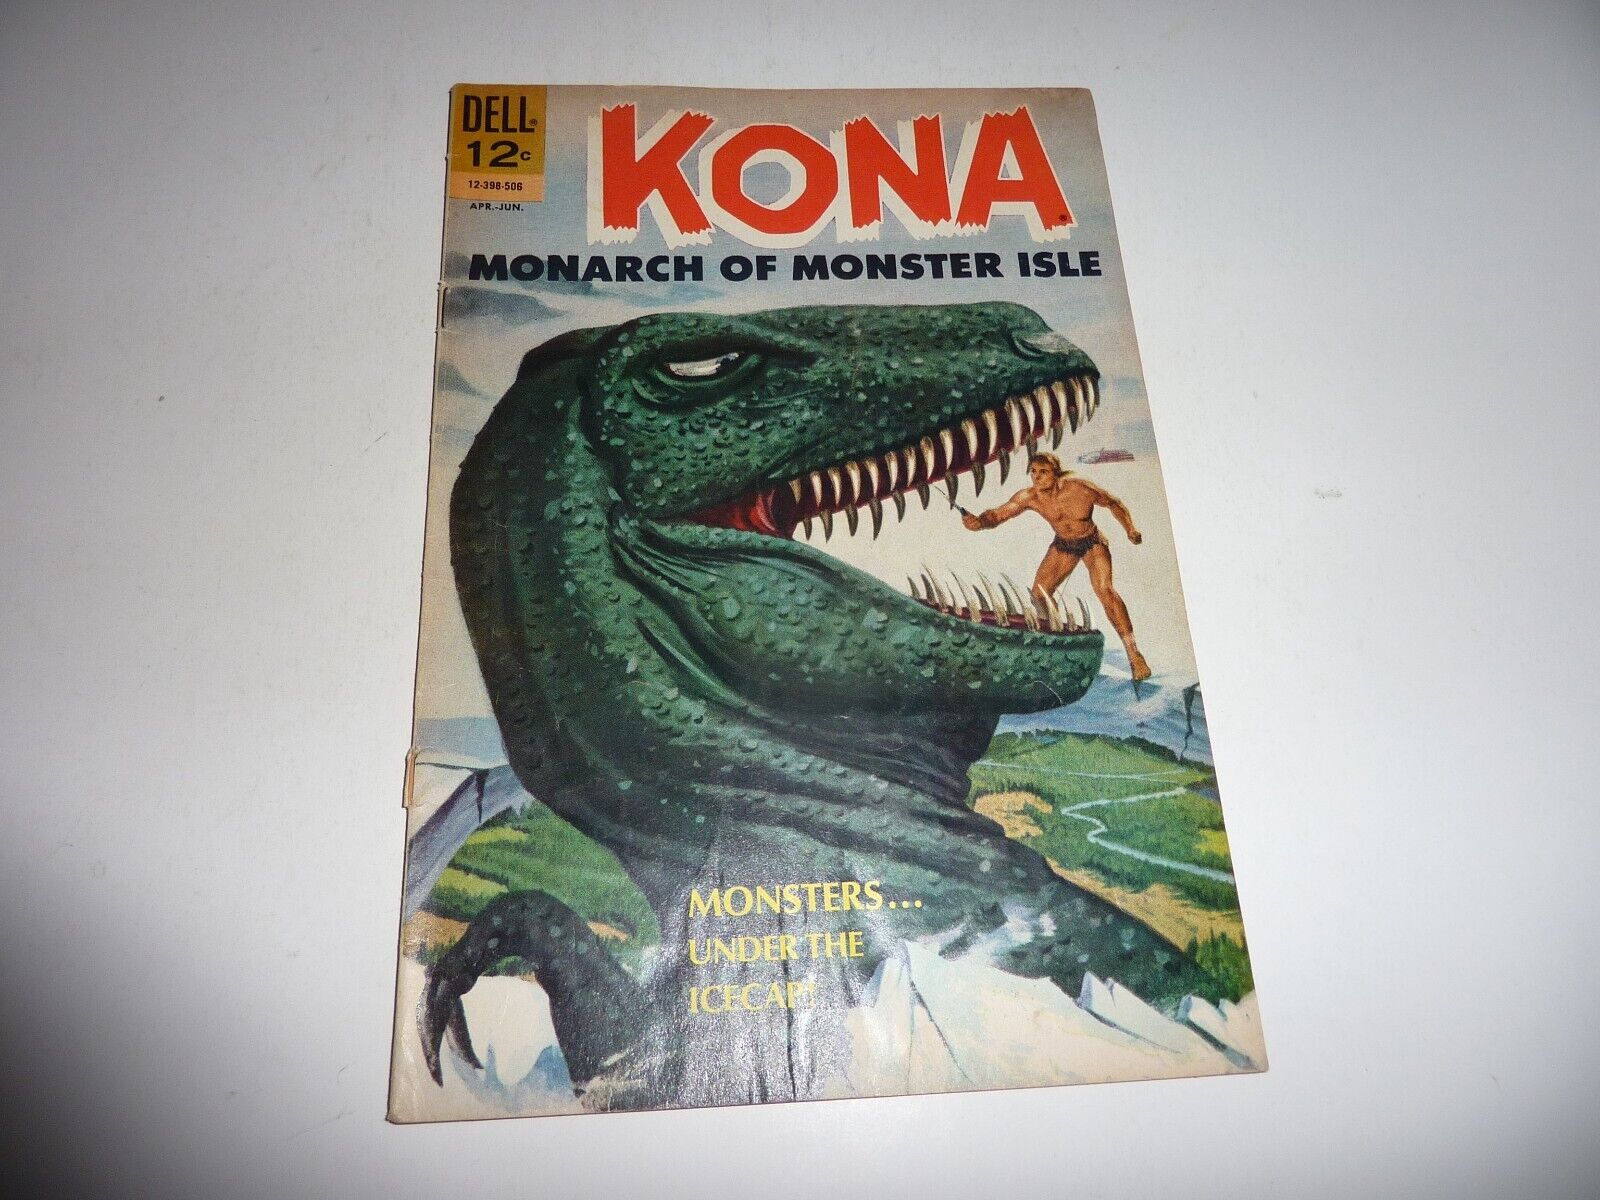 KONA MONARCH OF MONSTER ISLE #14 Dell Comics 1965 Dinosaurs VG/FN 5.0 Silver Age